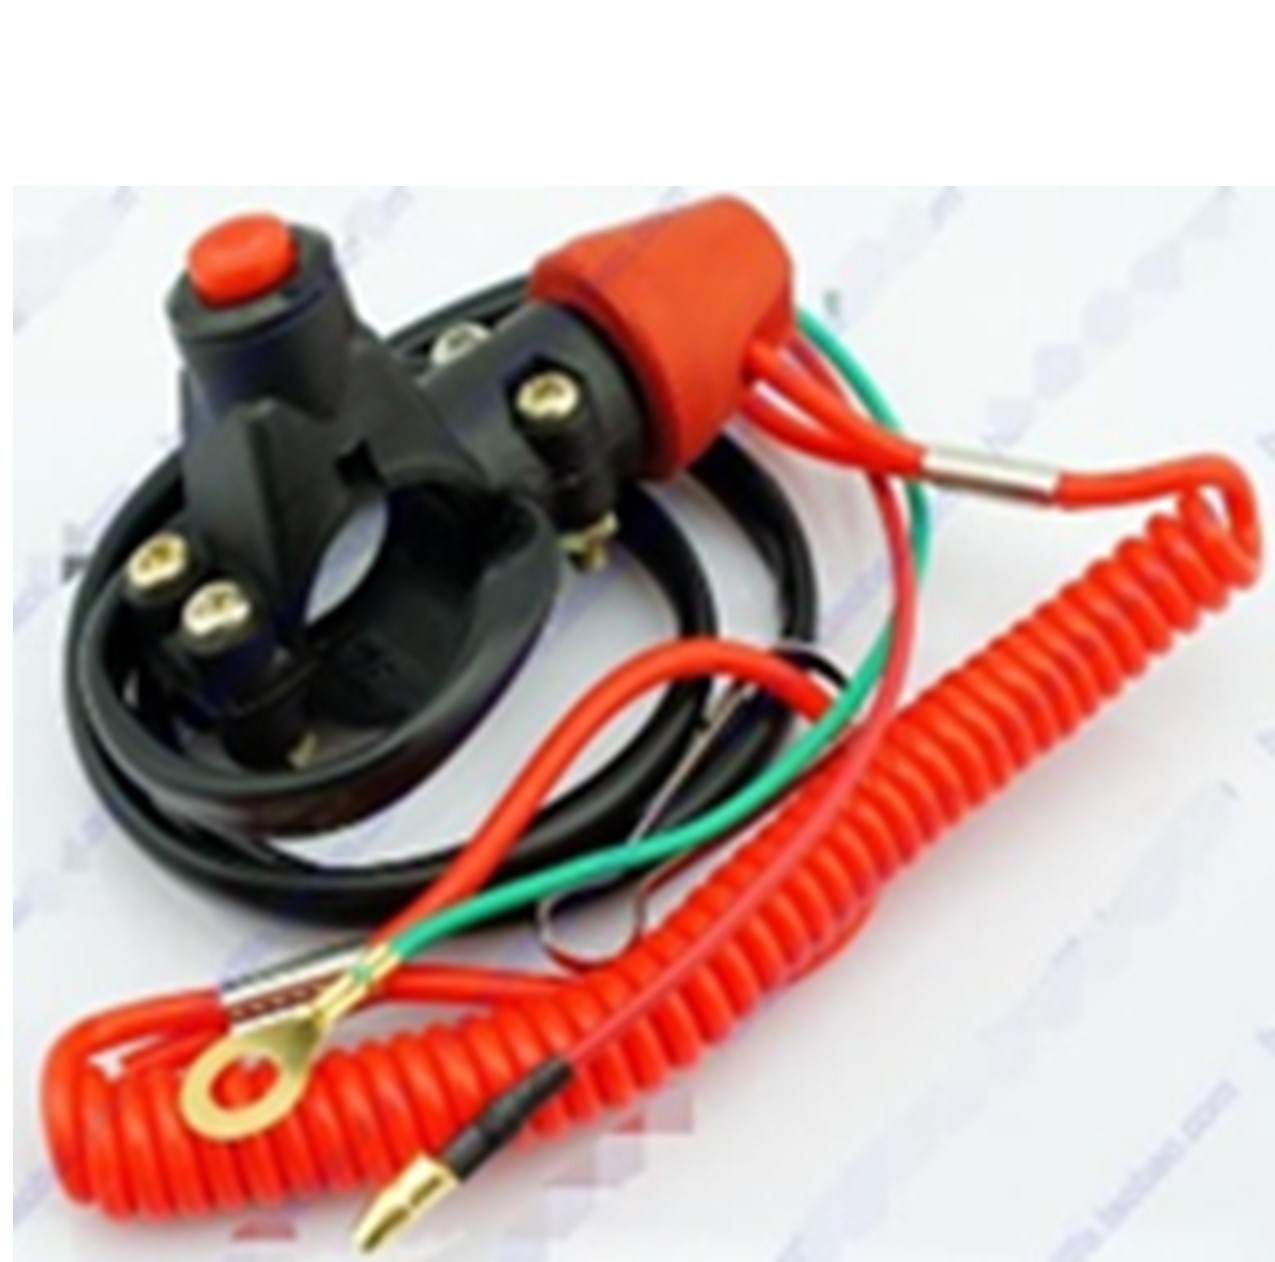 Universal Safety Tether Switch - Used on Many ATVs-GoKarts-Dirt Bikes. - Click Image to Close